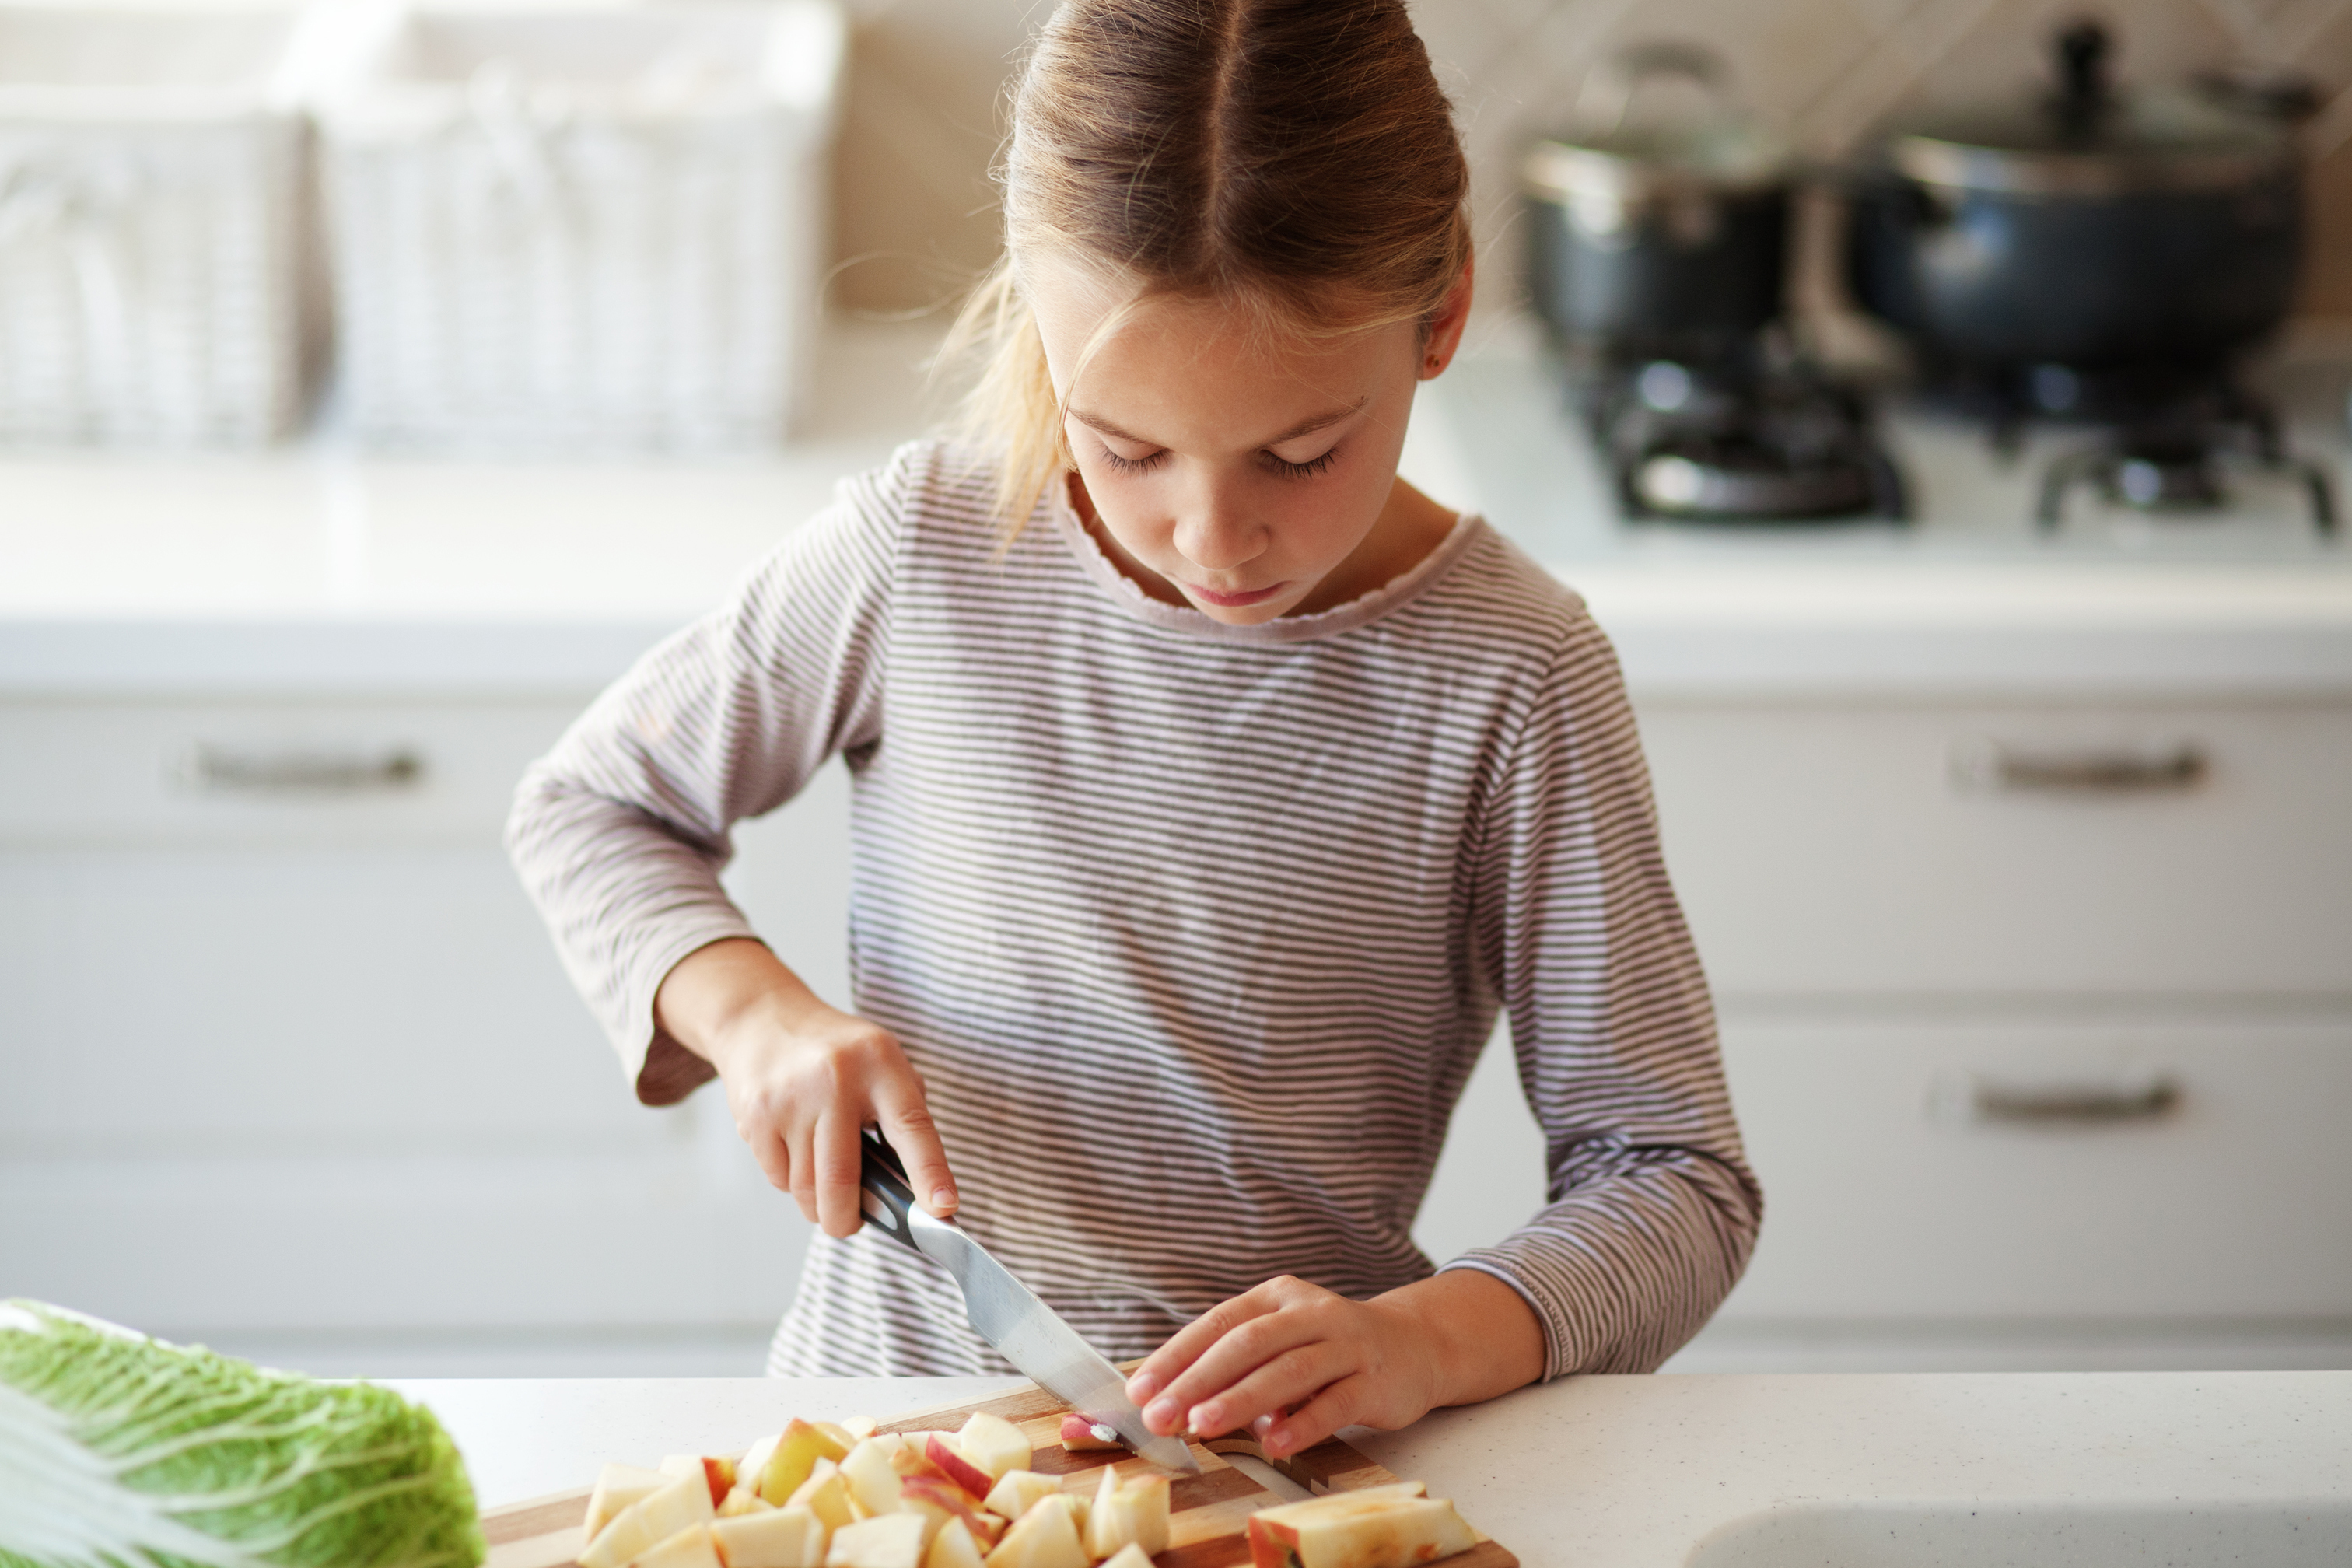 Healthy Kids Eat ‘Grown-Up Food’ and Like It